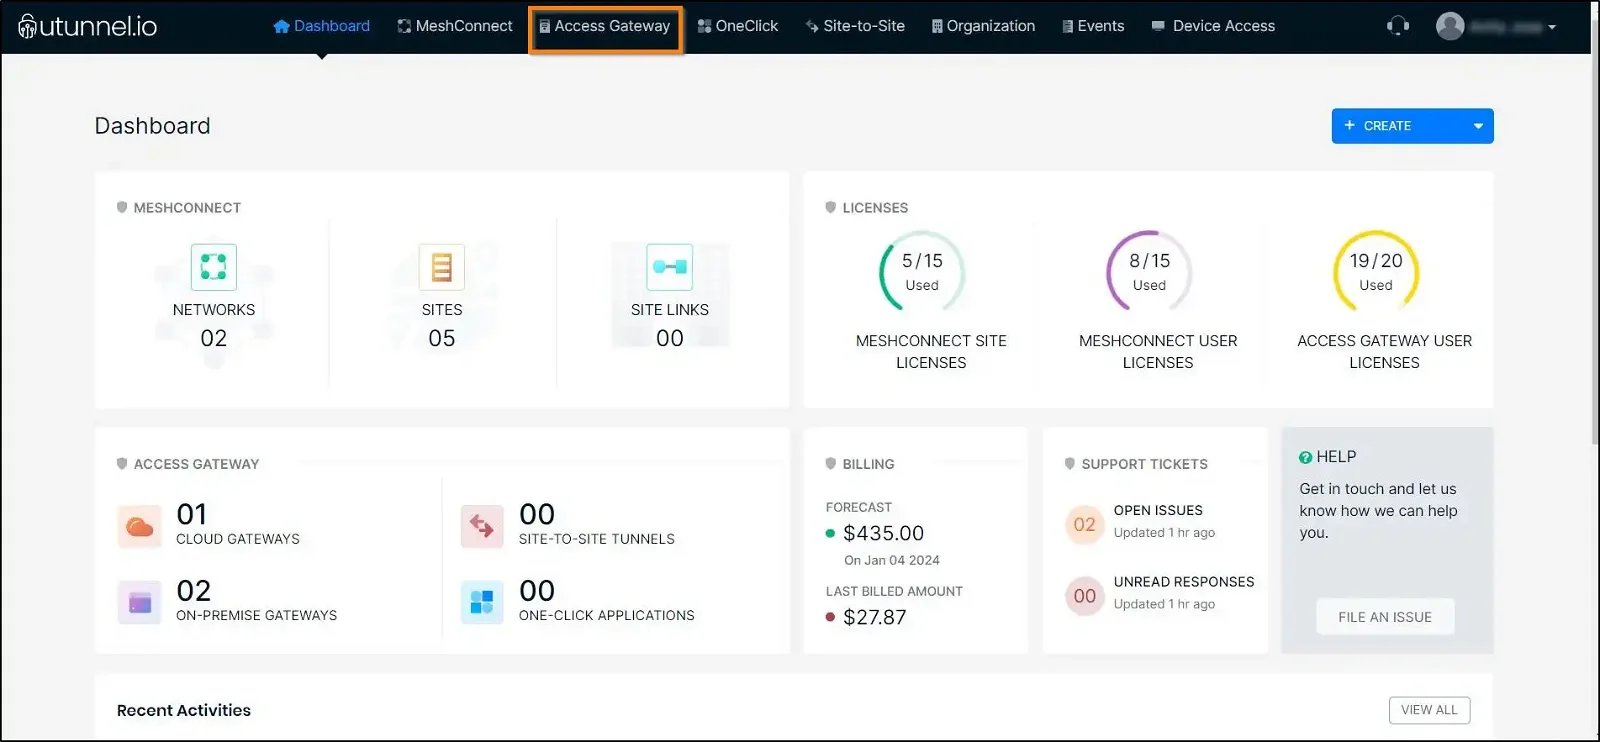 How to add a user to an organization server dashboard